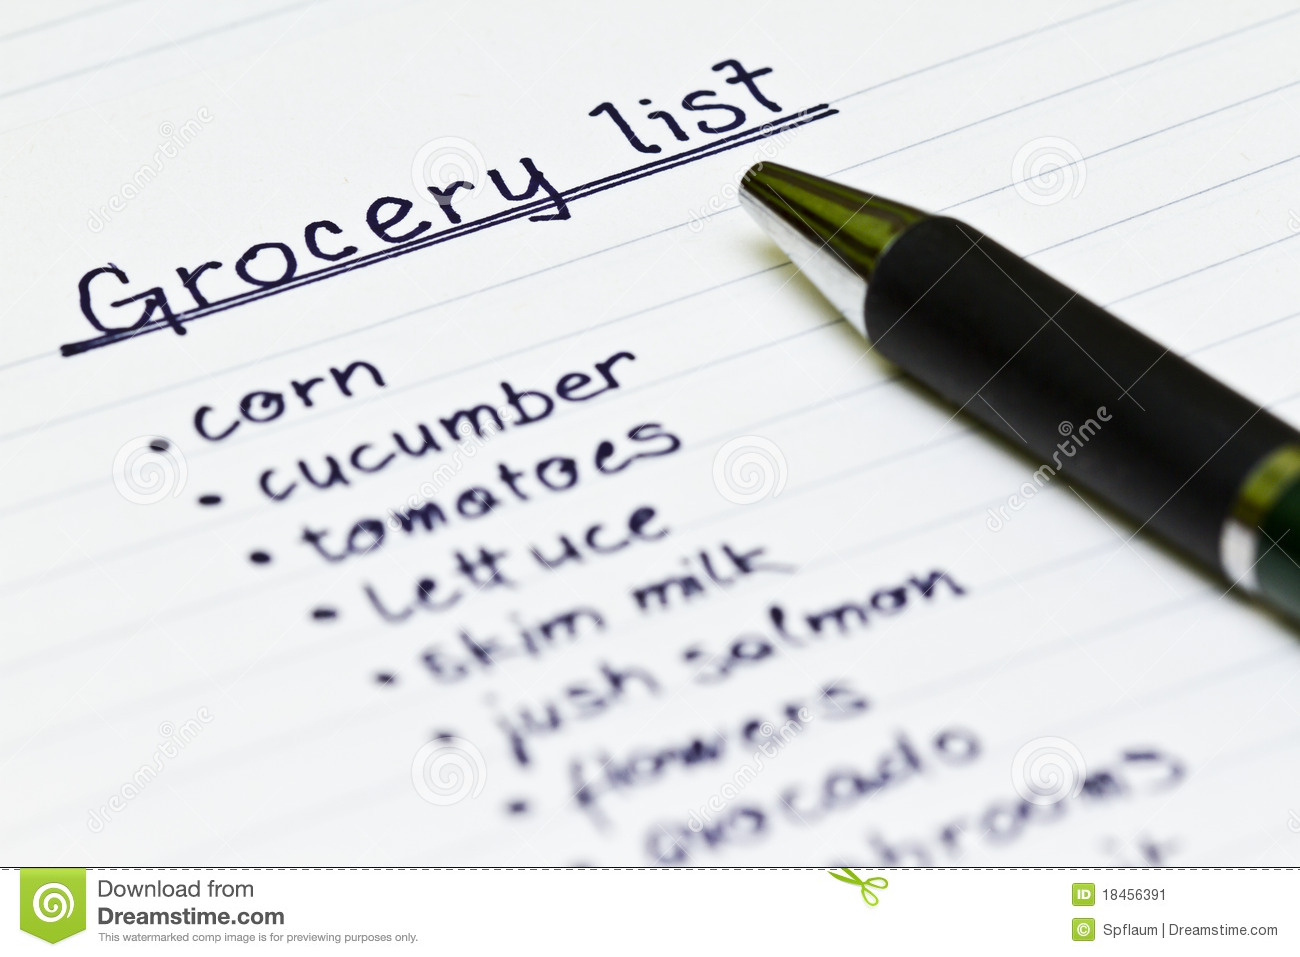 Grocery list clipart 6 » Clipart Station.